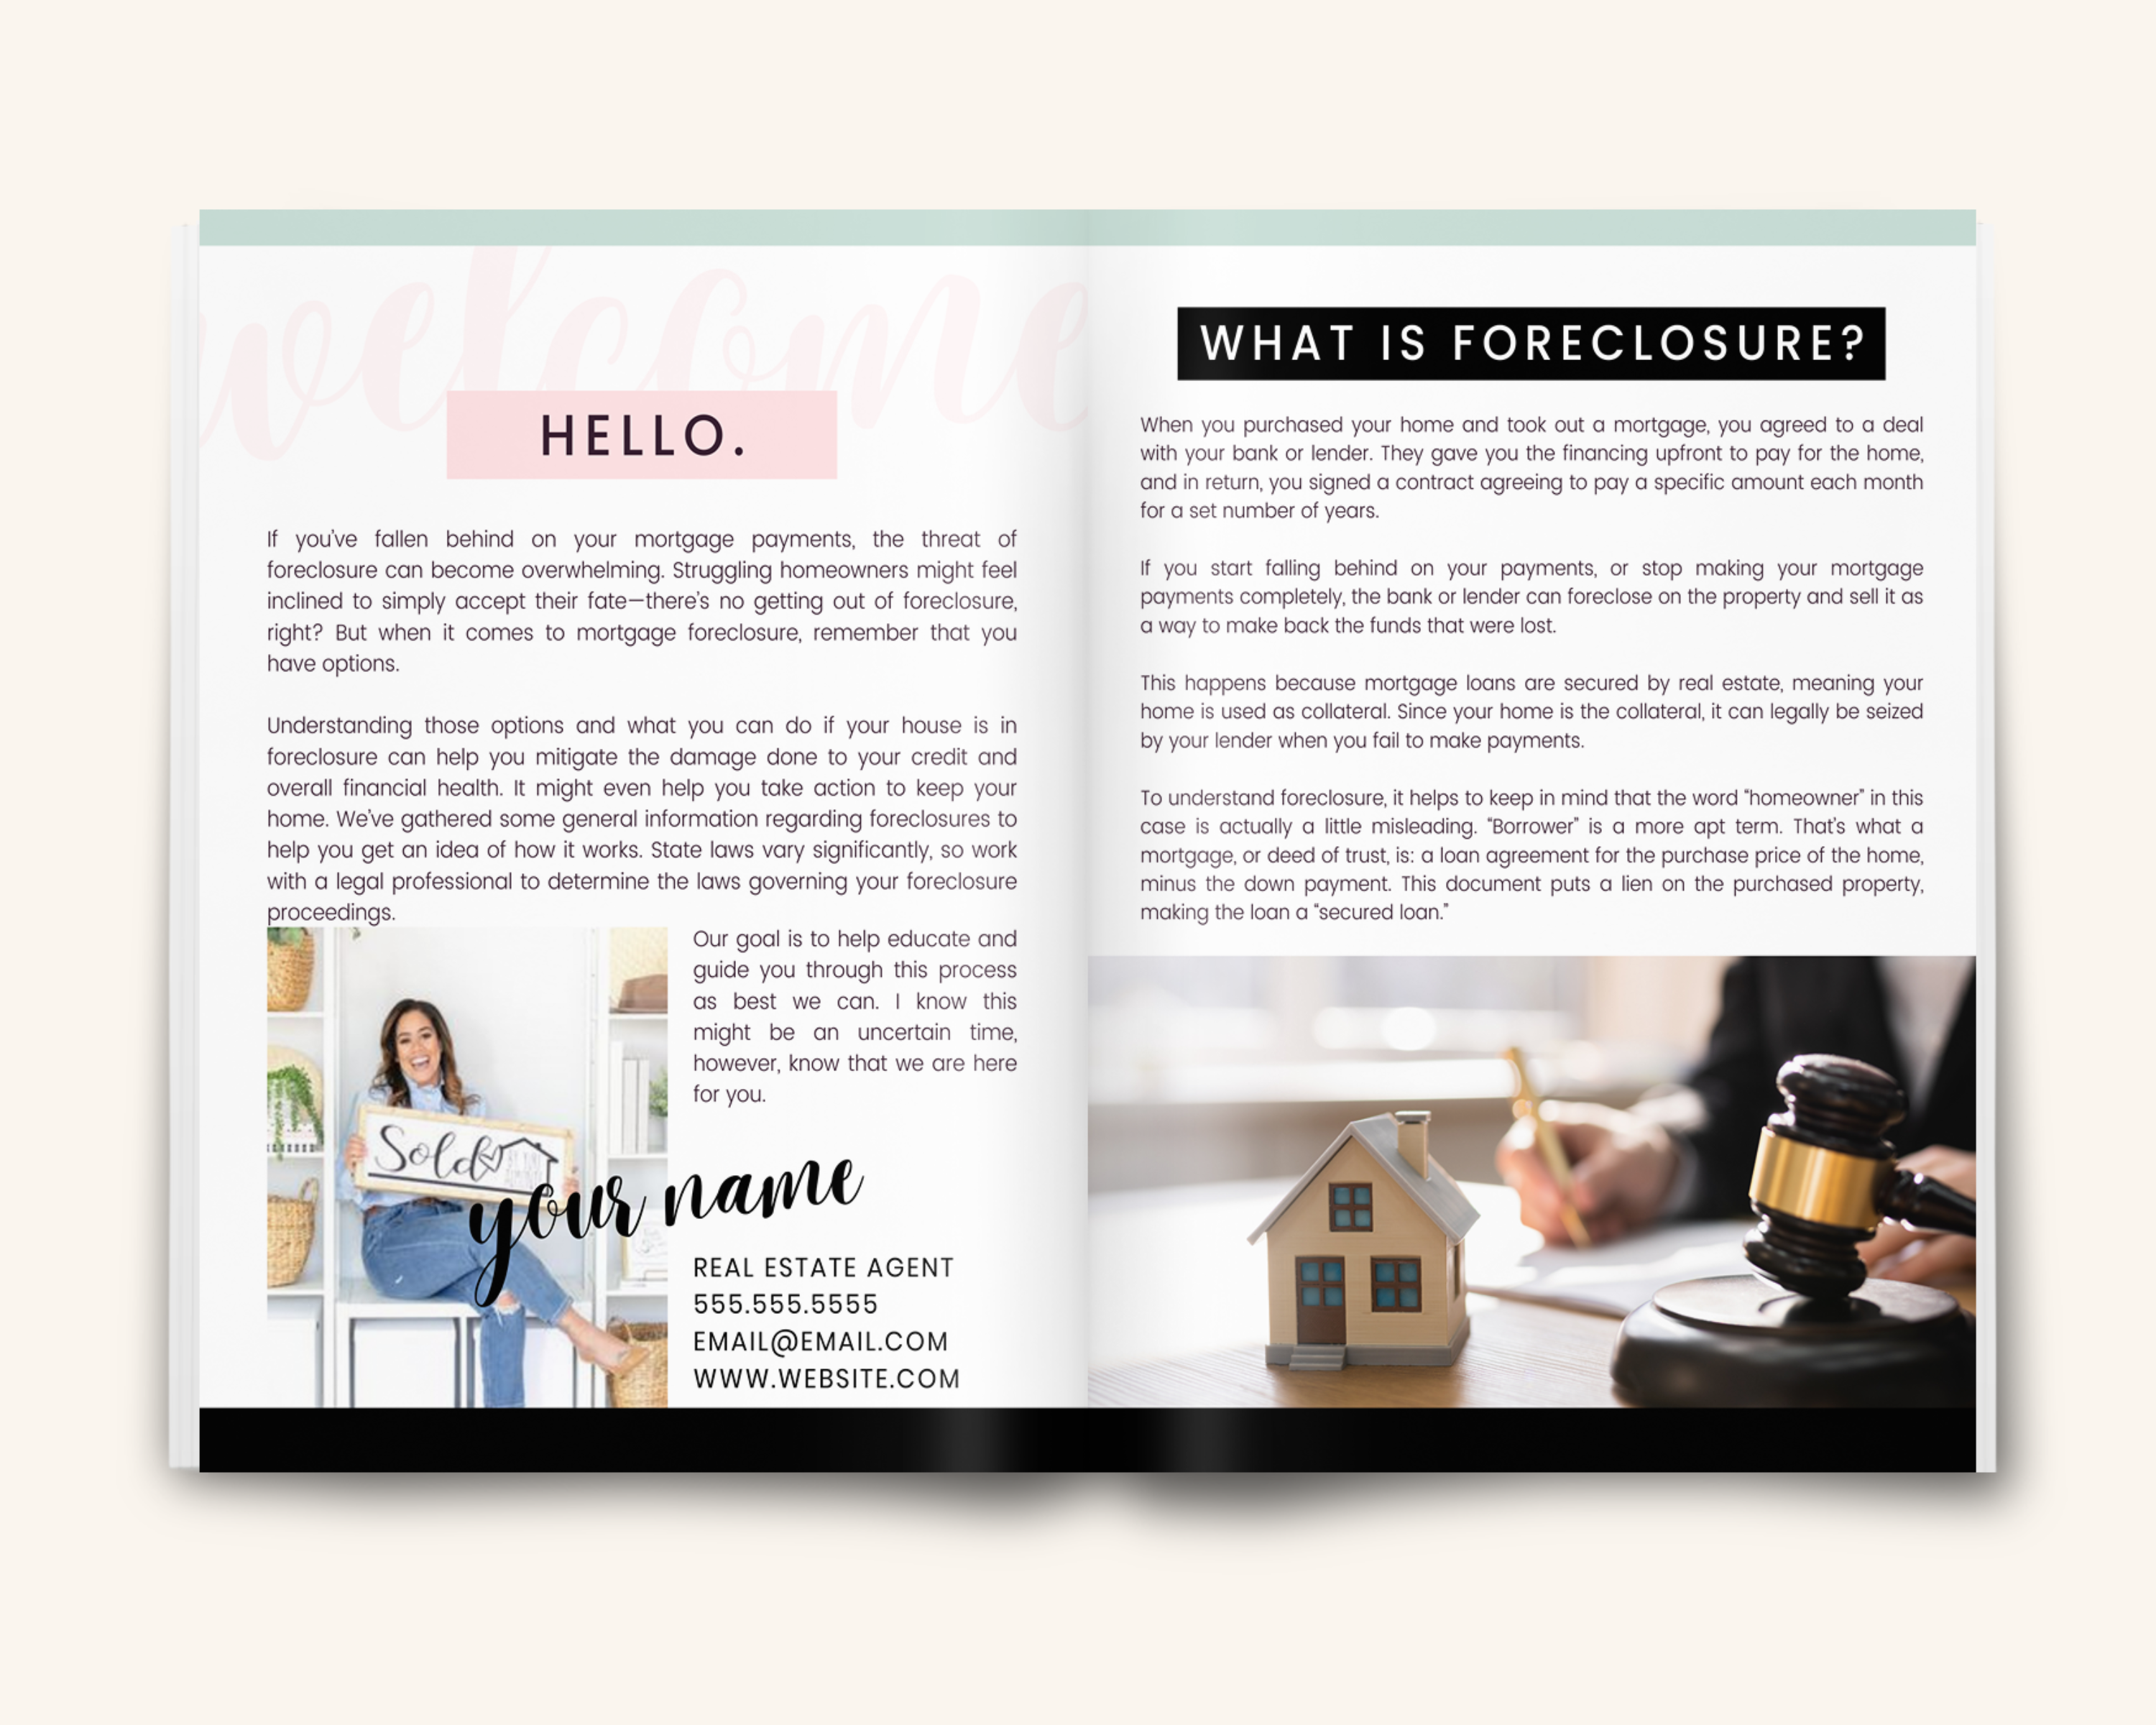 Foreclosure Guide - Playful Brand